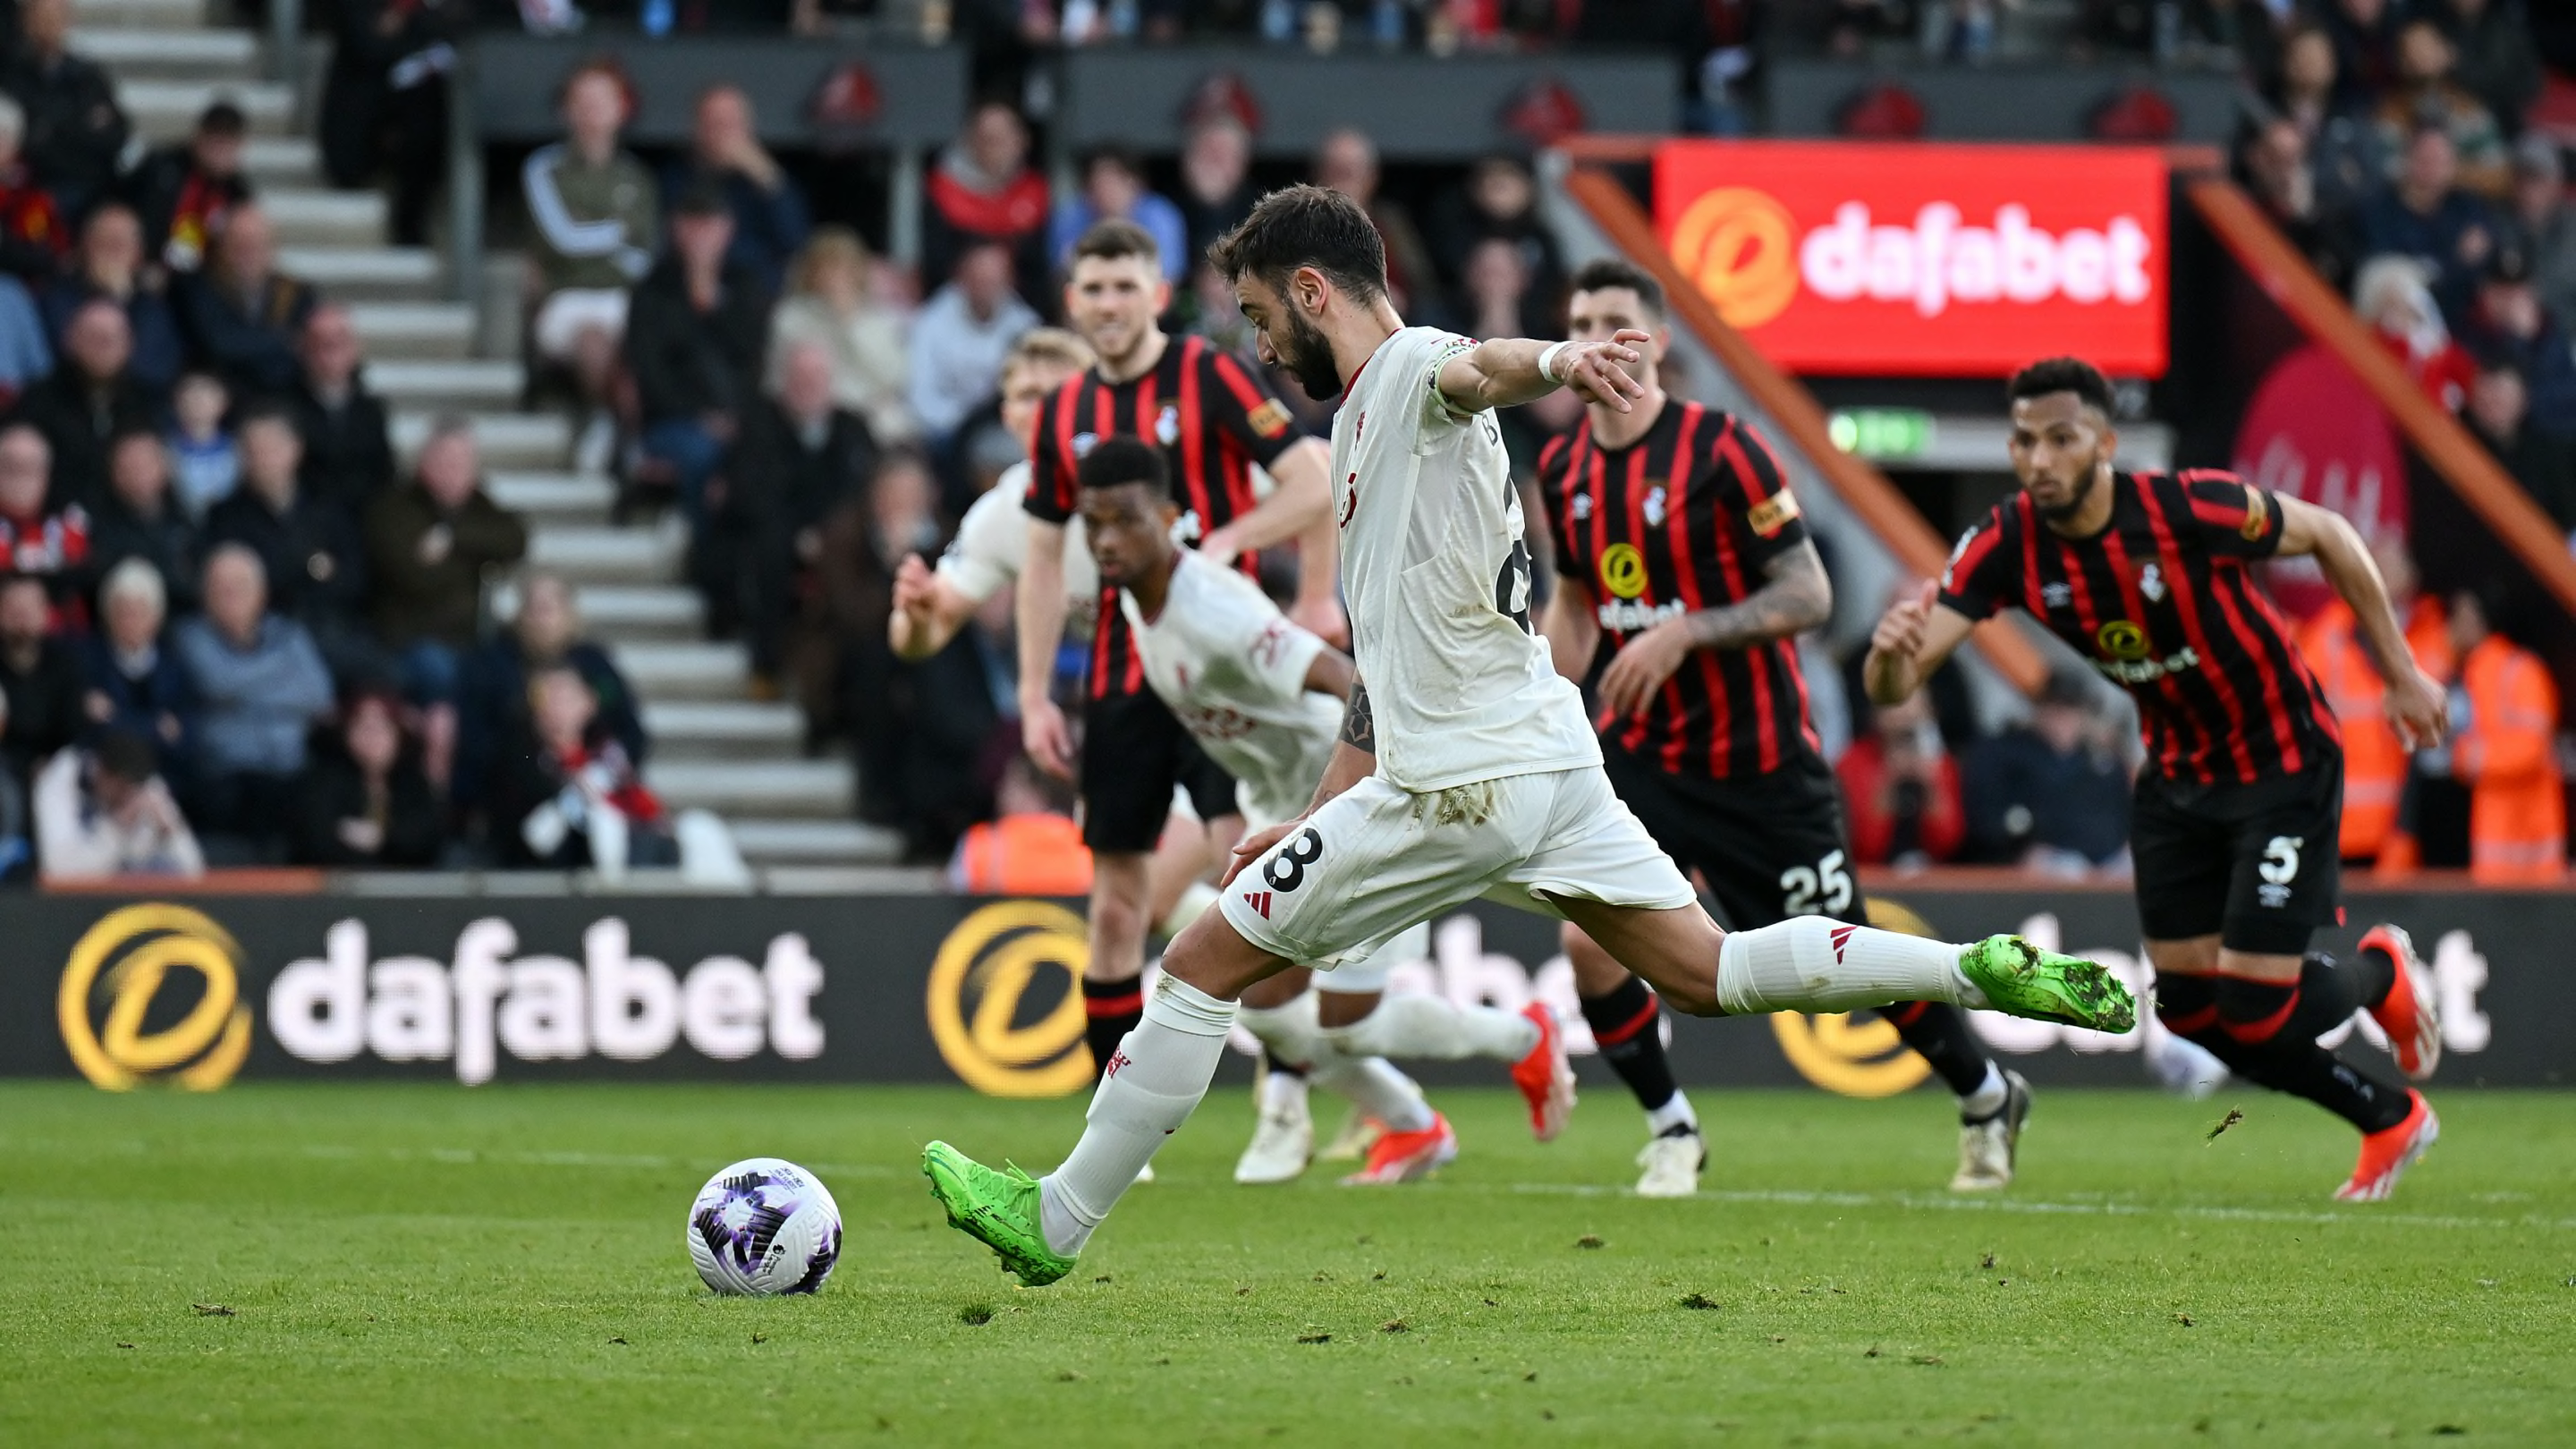 Bournemouth 2-2 Man Utd: Player ratings as Fernandes brace rescues point for Red Devils